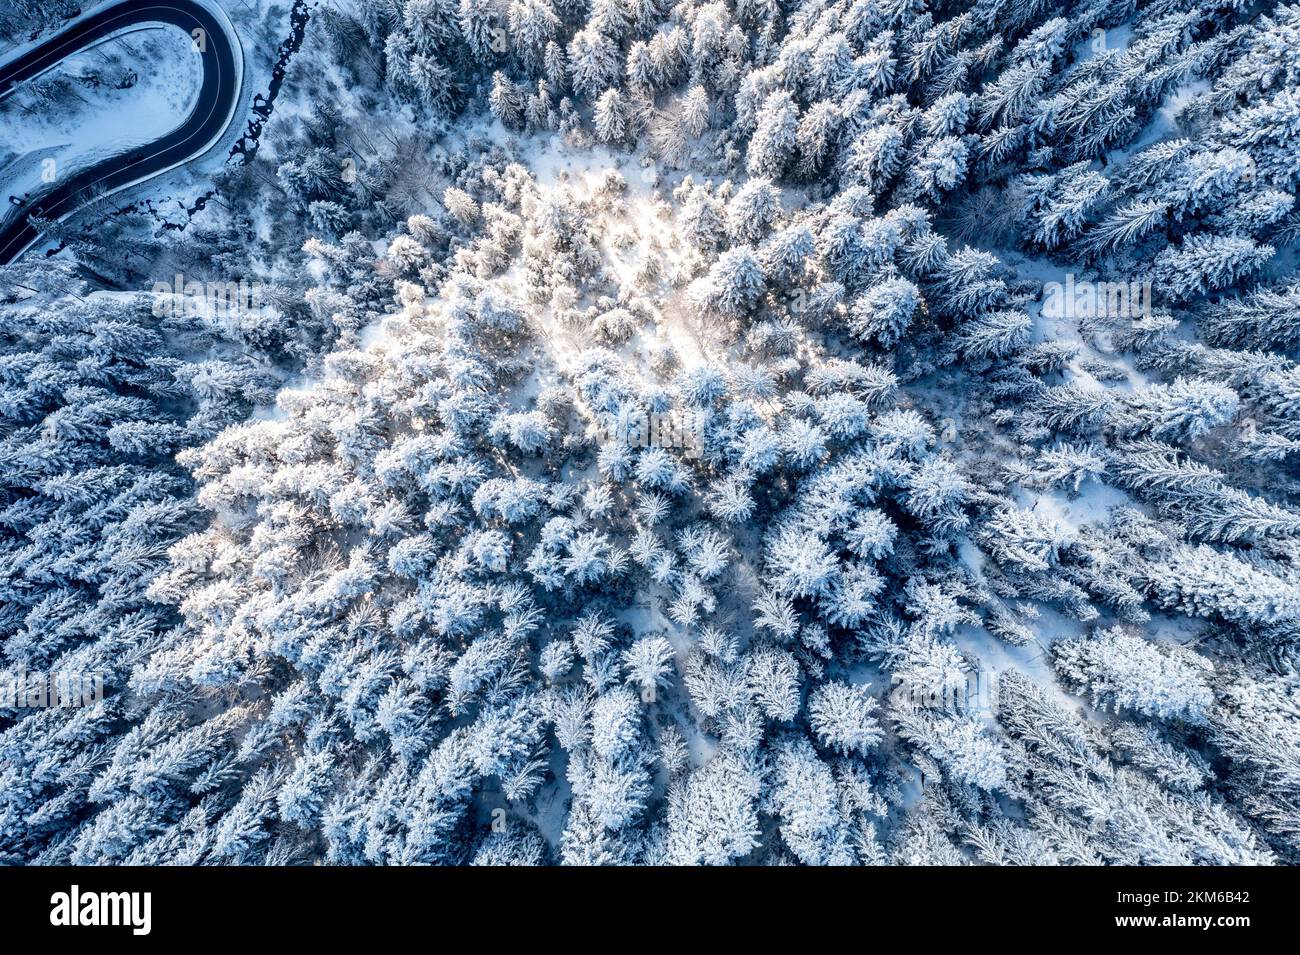 Carpathian, Romania, 2021-12-28. Aerial view of pine trees under the snow illuminated by the sun. Stock Photo